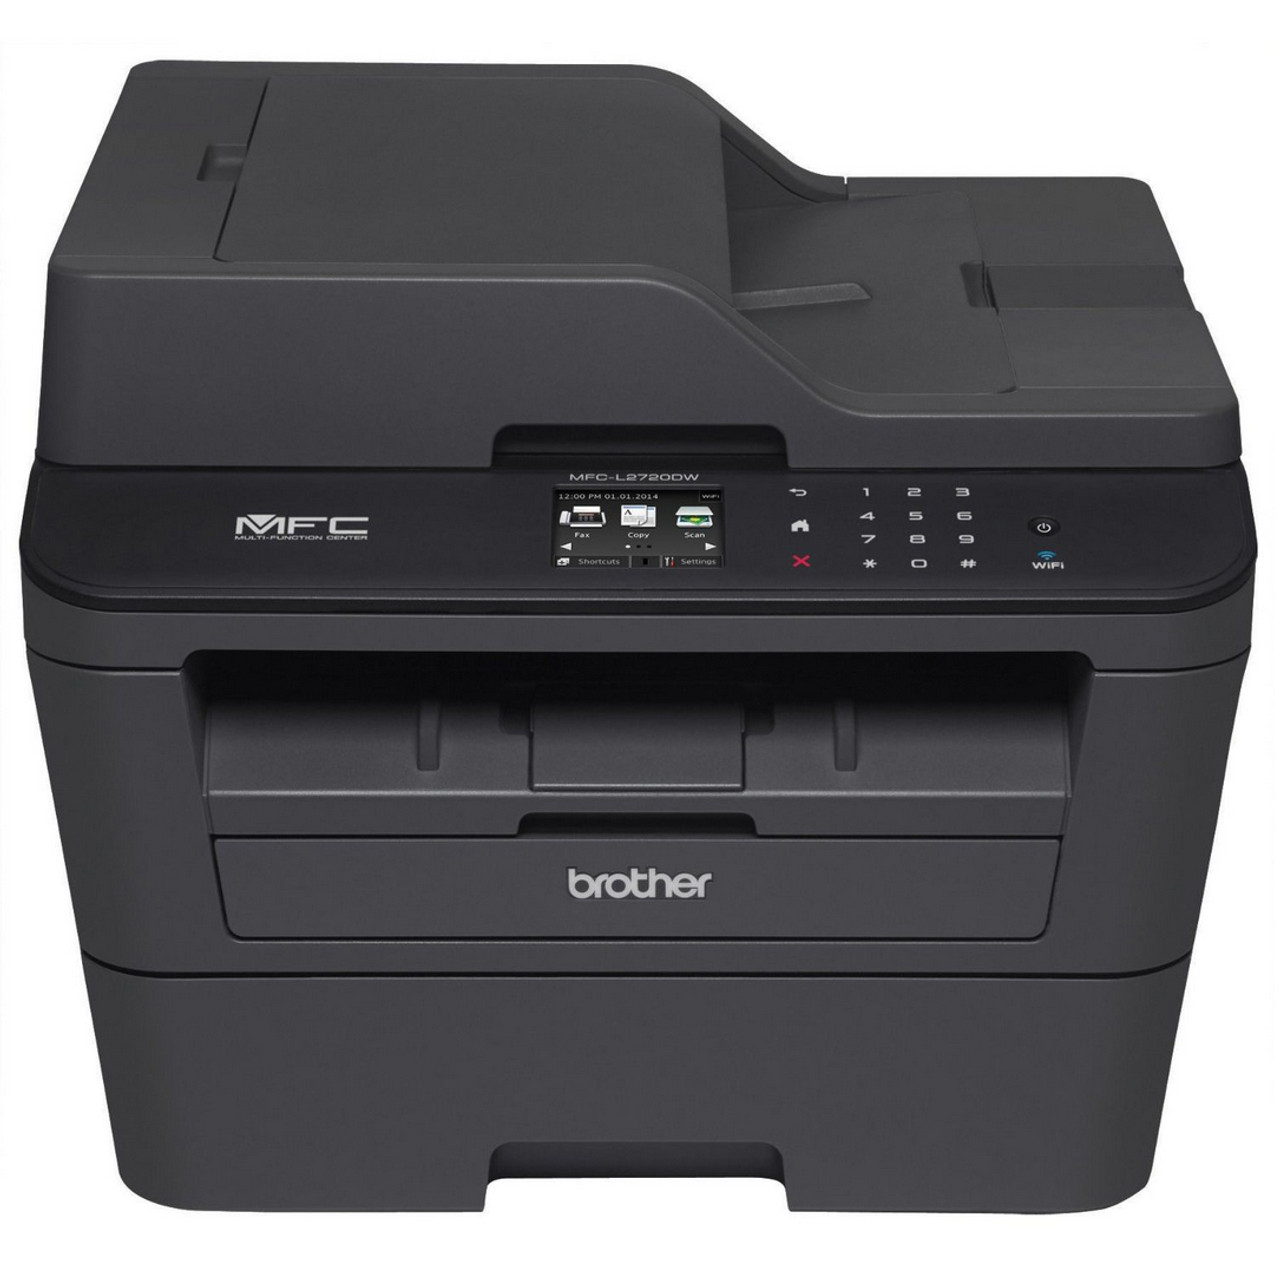 Brother MFC-L2720DW 2400 x 600DPI Laser A4 3ppm Wi-Fi multifunctional